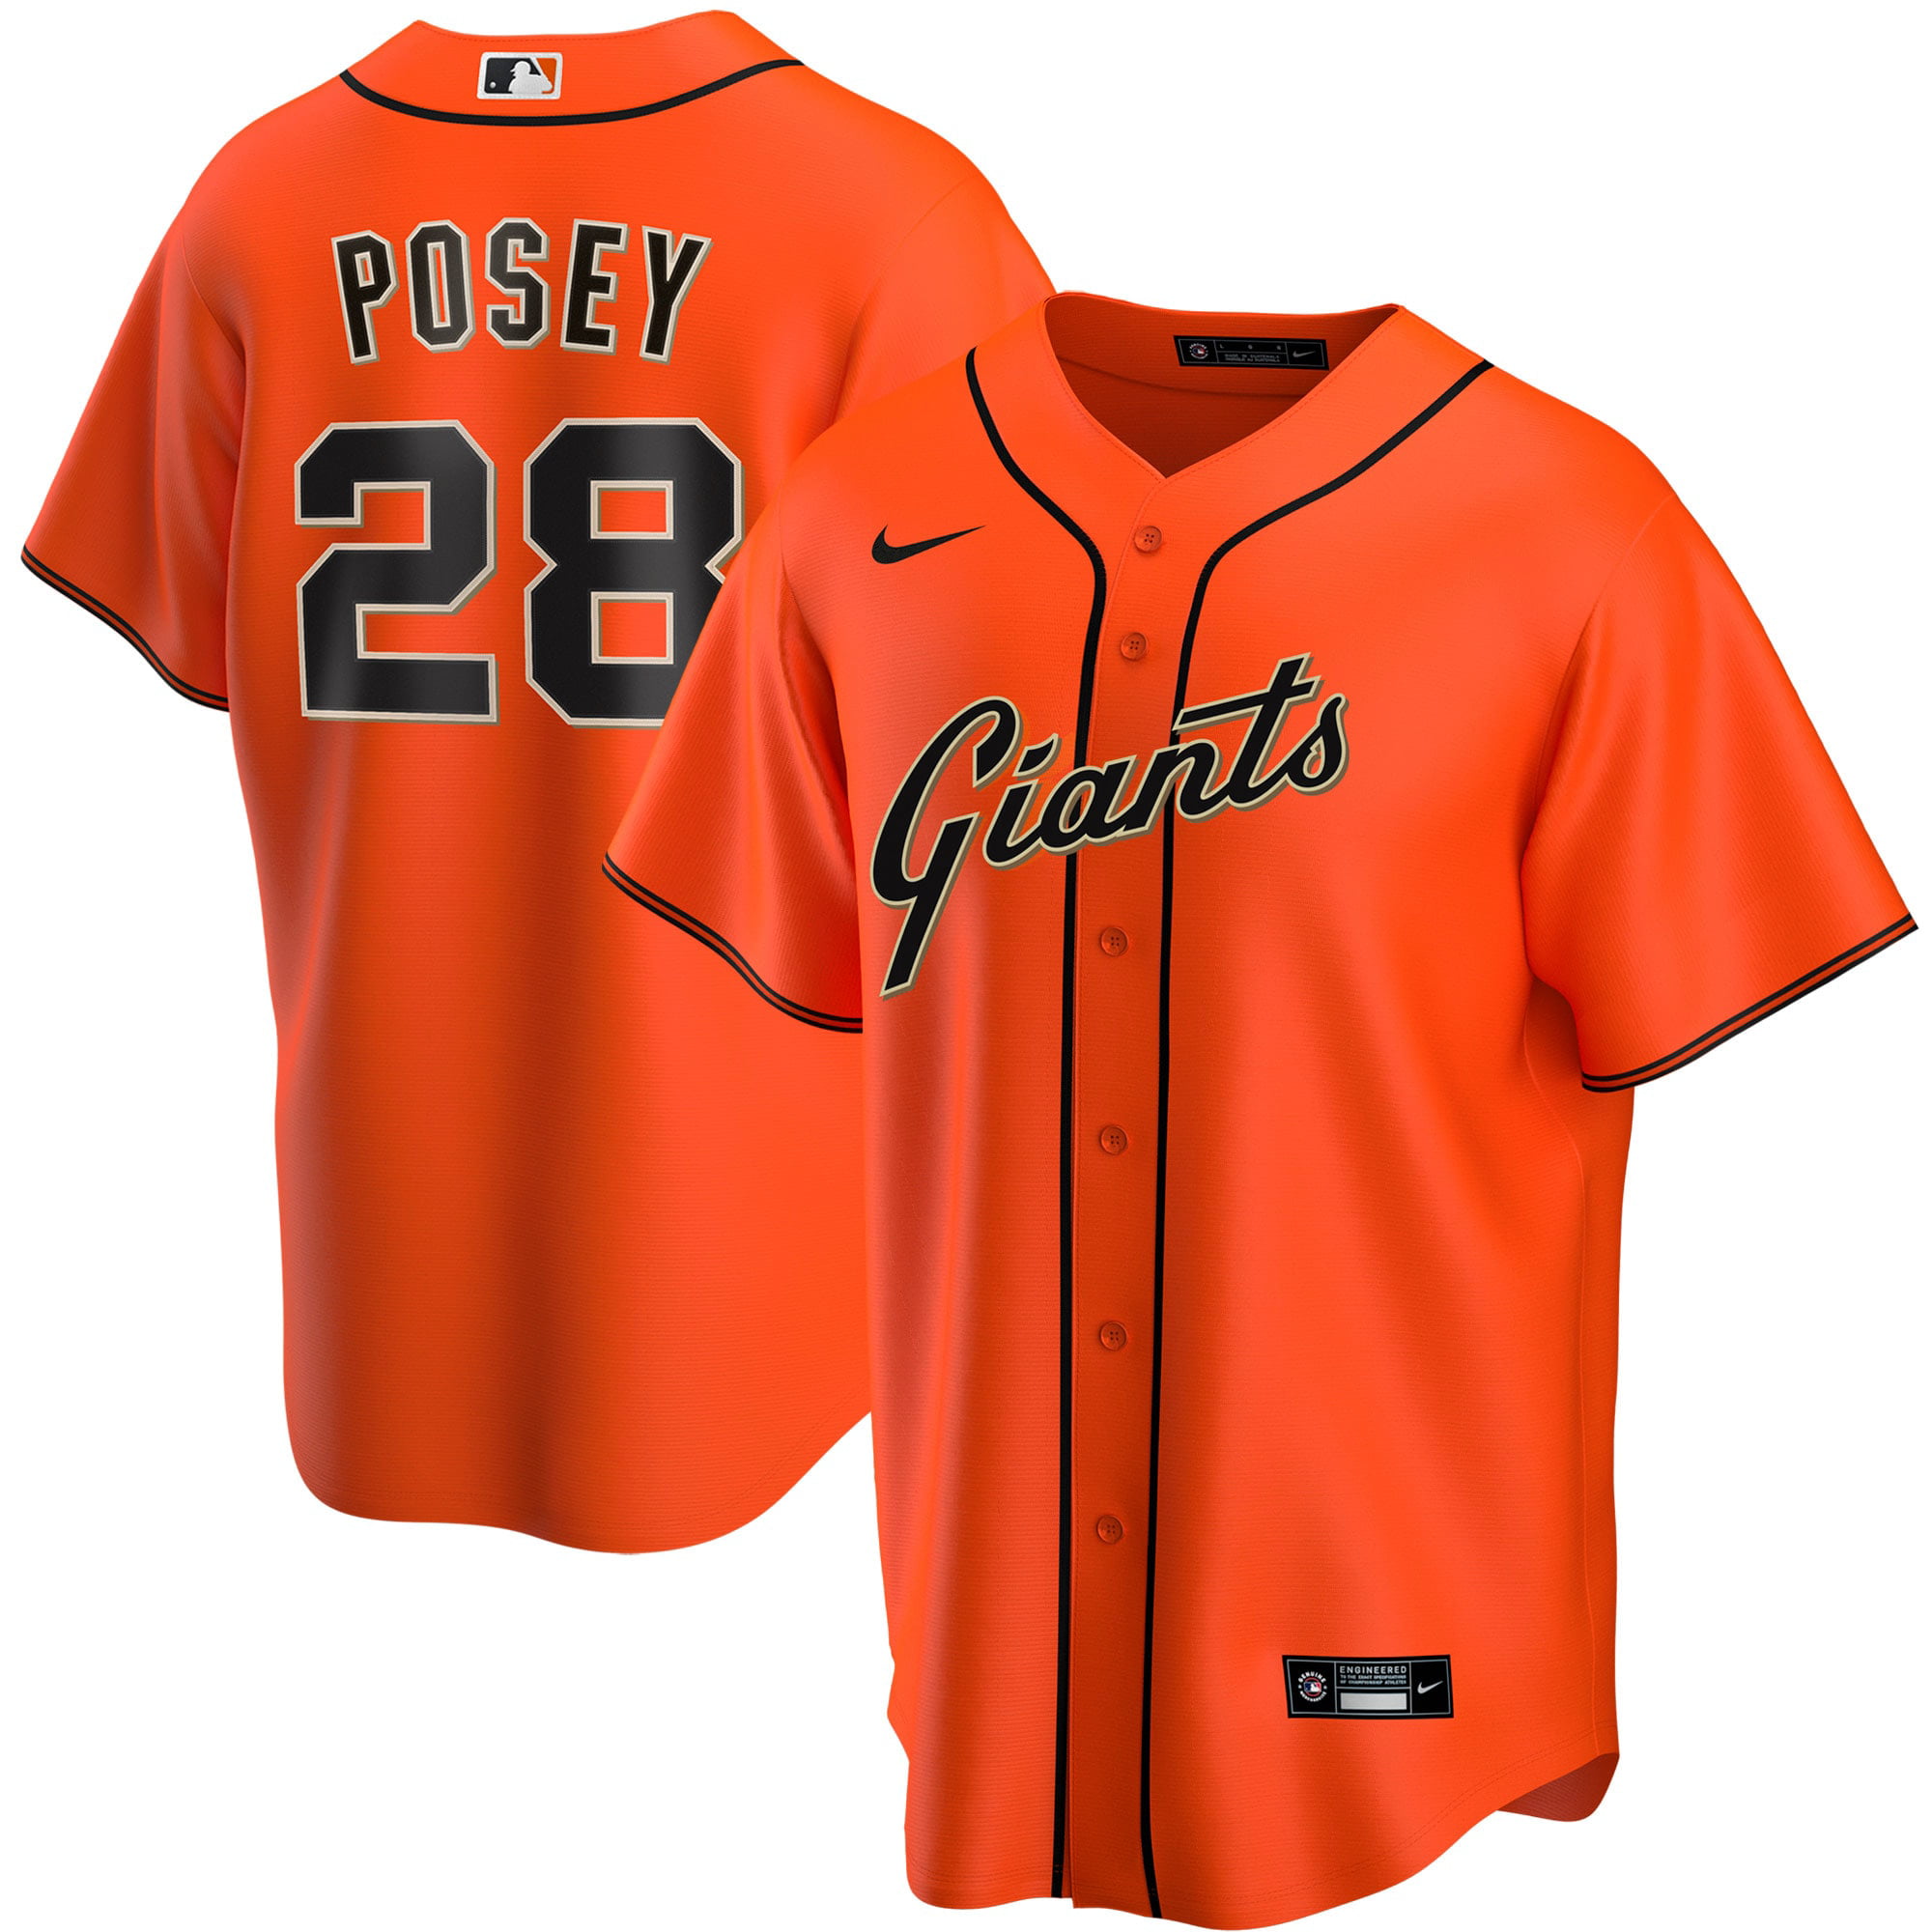 buster posey black jersey